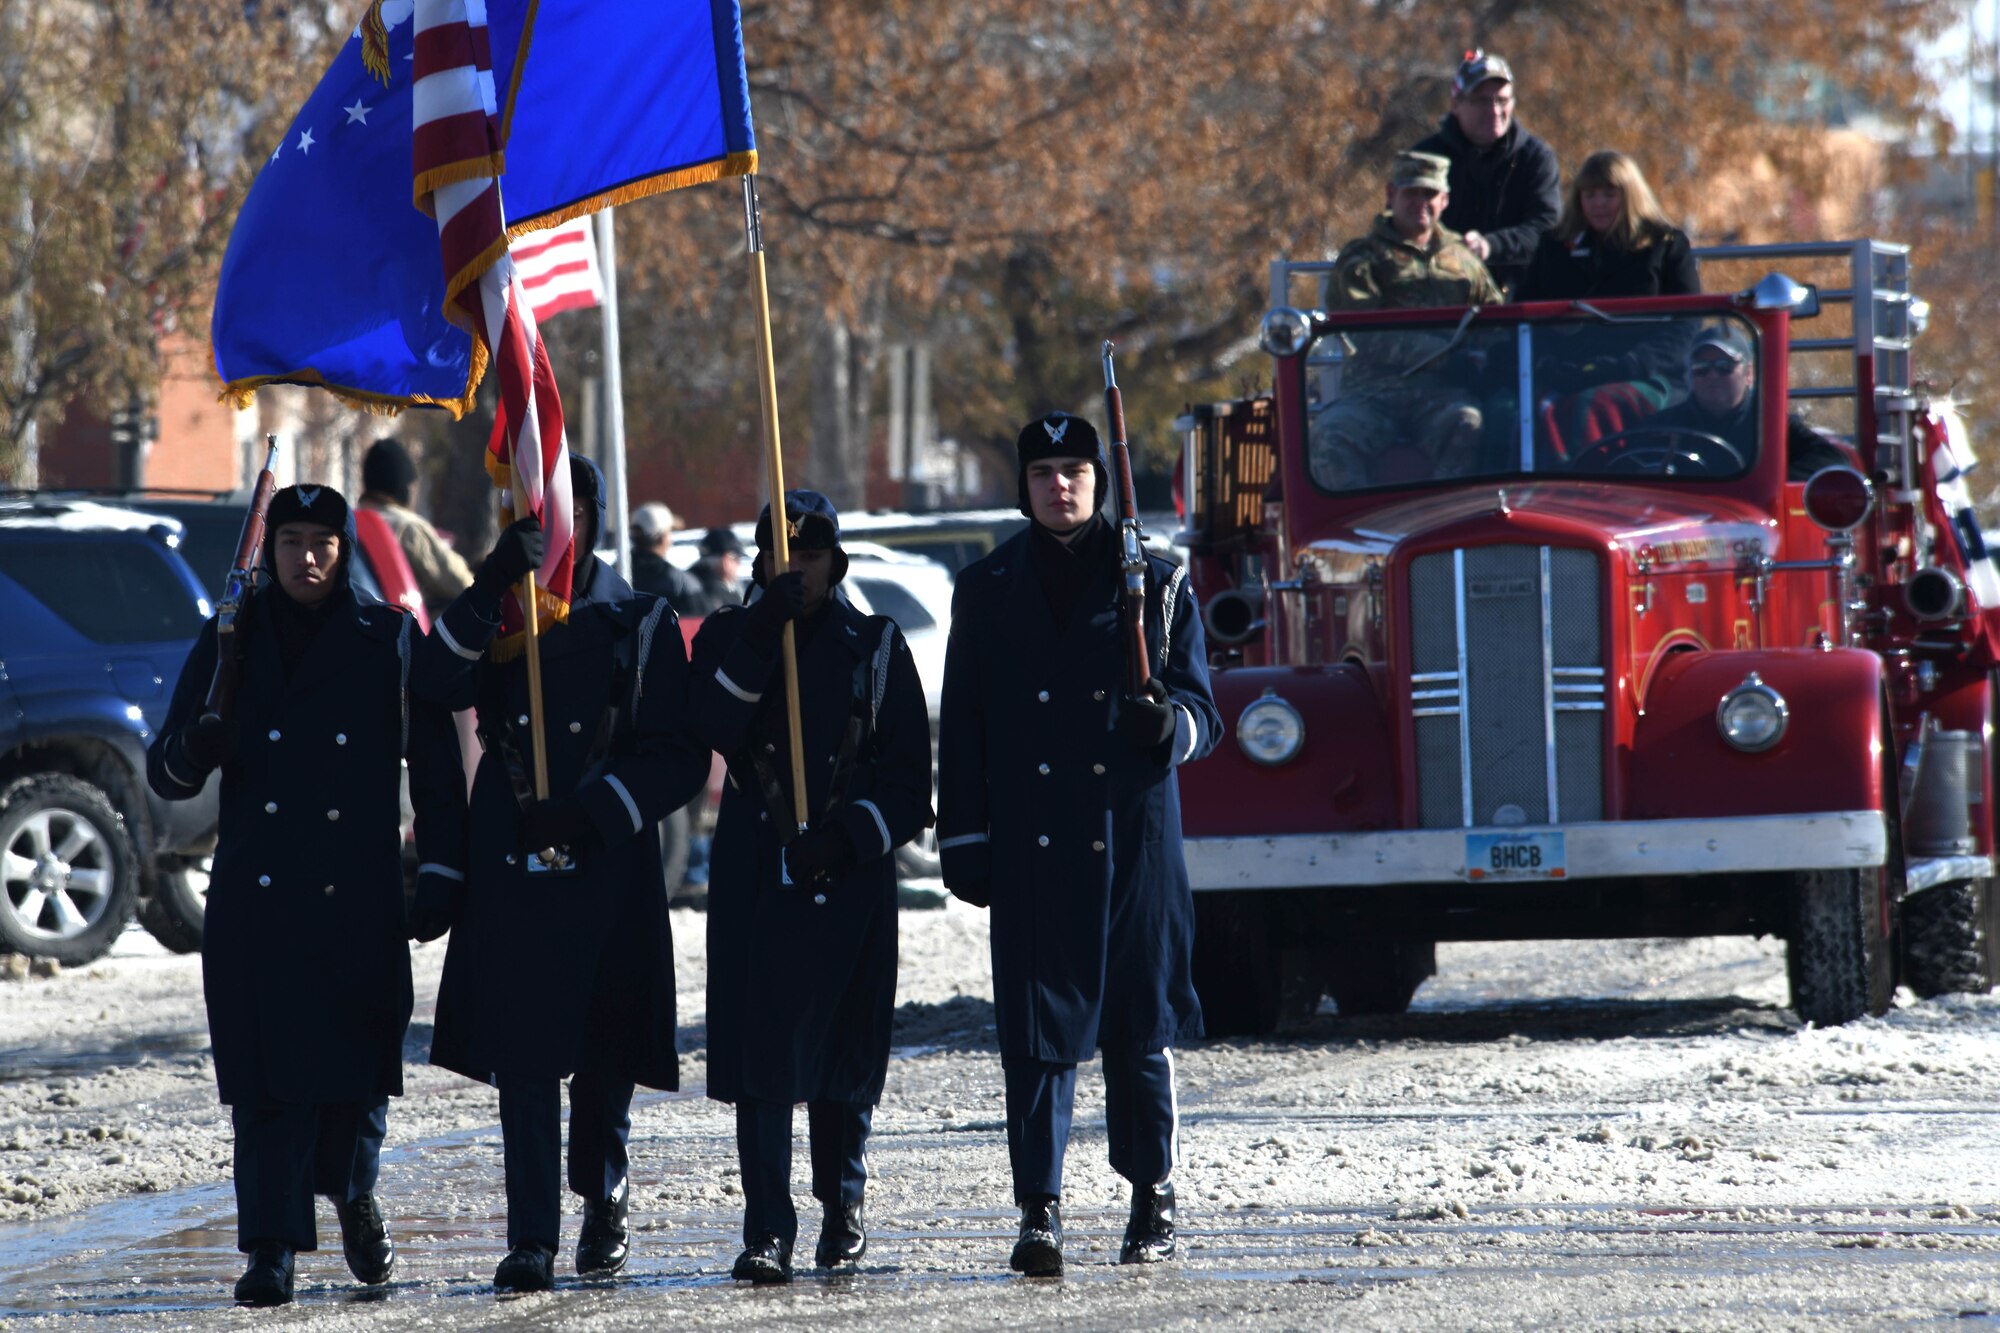 The Ellsworth Air Force Base, S.D., Honor Guard walks in the 2019 Veteran’s Day Parade ahead of the flagship fire truck on Main Street in Rapid City, S.D., Nov. 11, 2019. Col. David A. Doss, 28th Bomb Wing commander, and his spouse, Marlina, rode in the truck and waved to those in attendance. (U.S. Air Force photo by Staff Sgt. Hailey Staker)